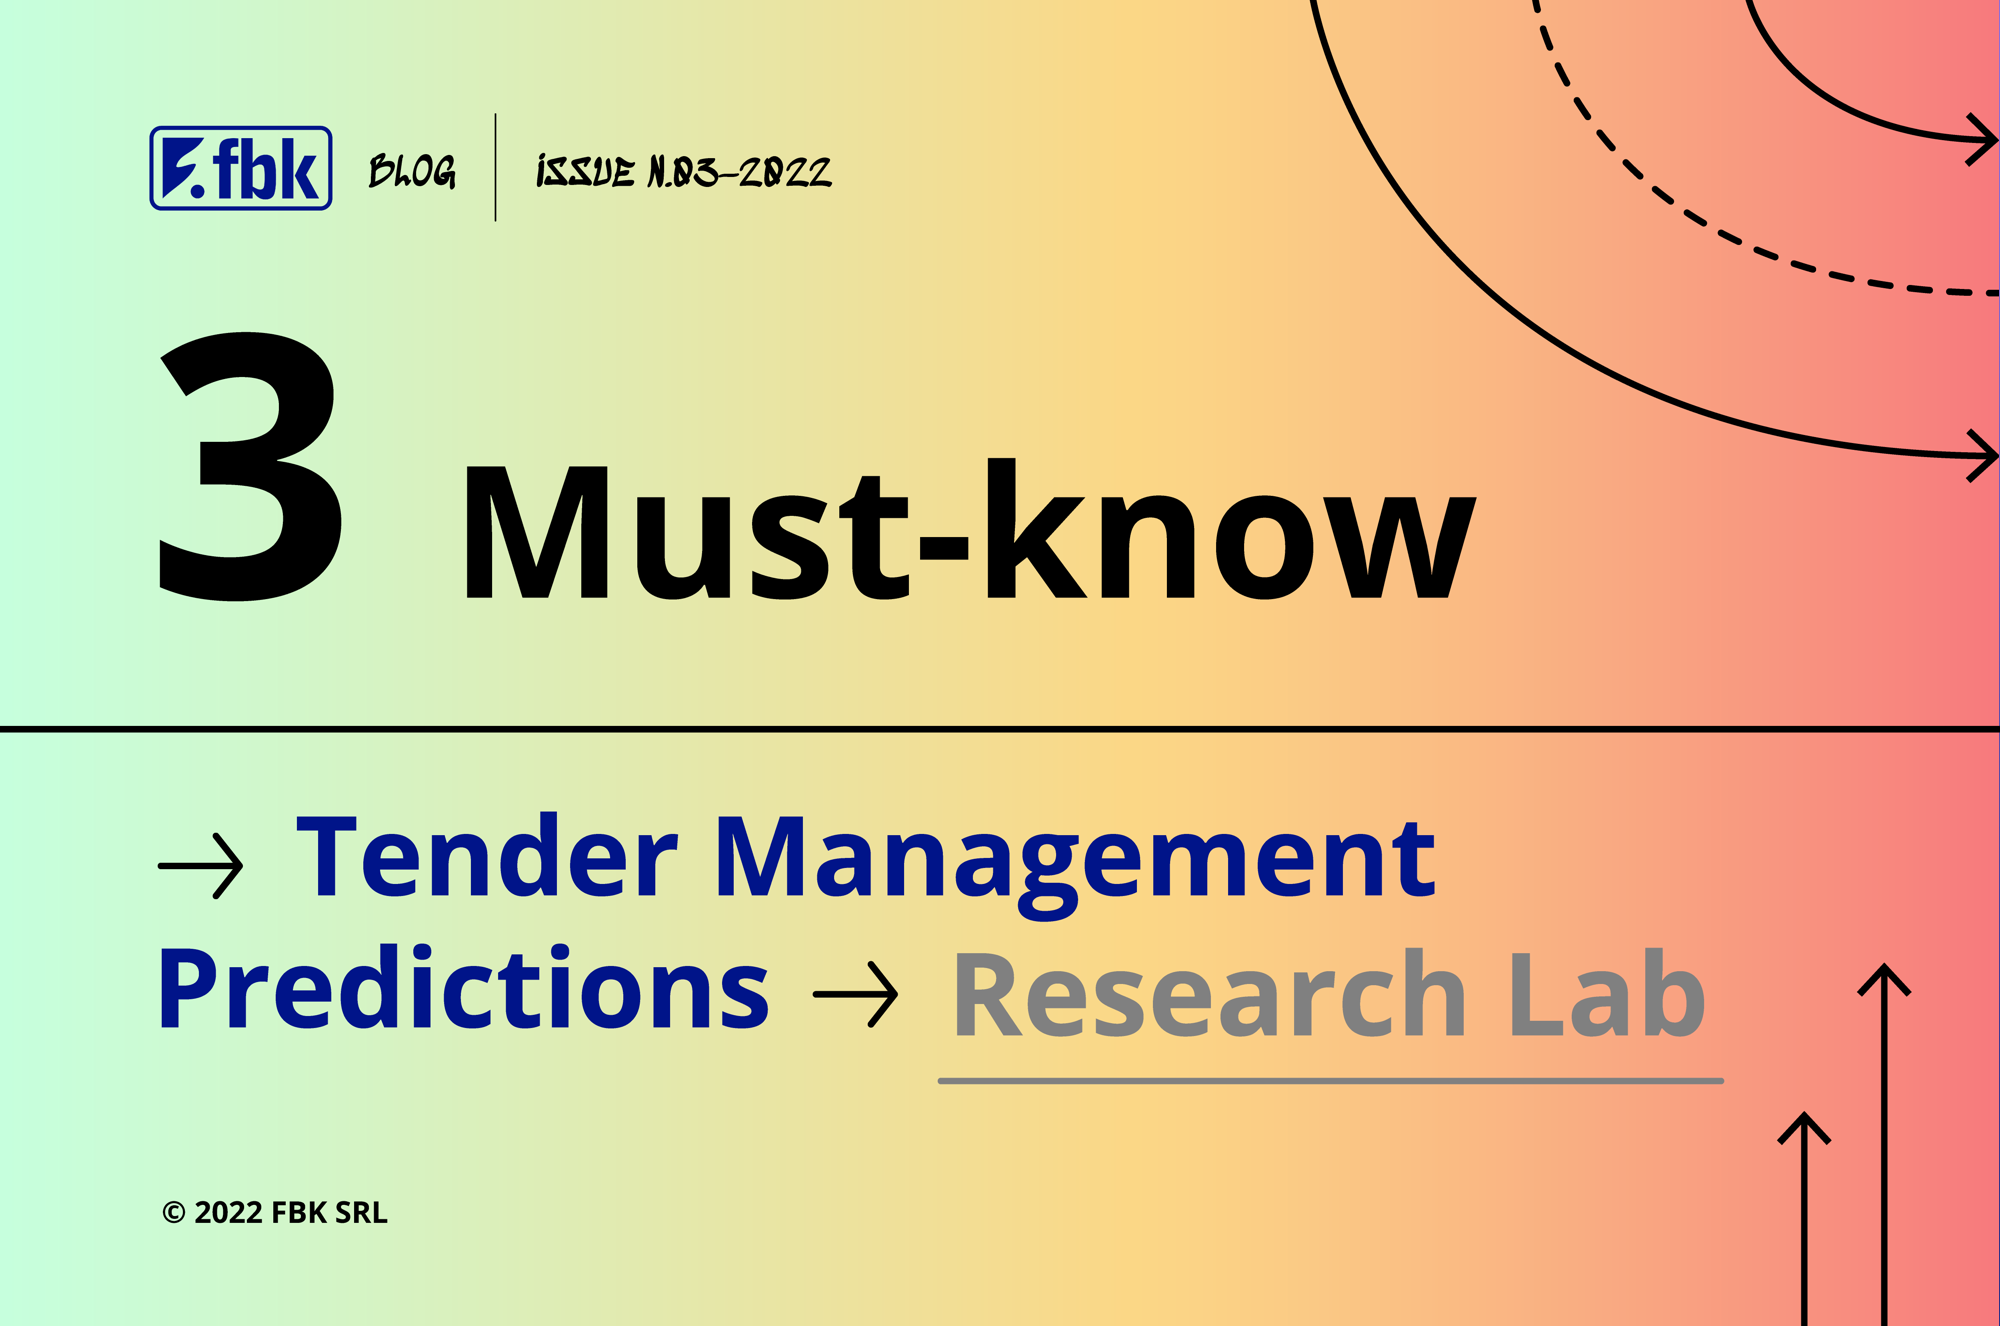 3 Must-know Tender Management Predictions from FBK Research Lab